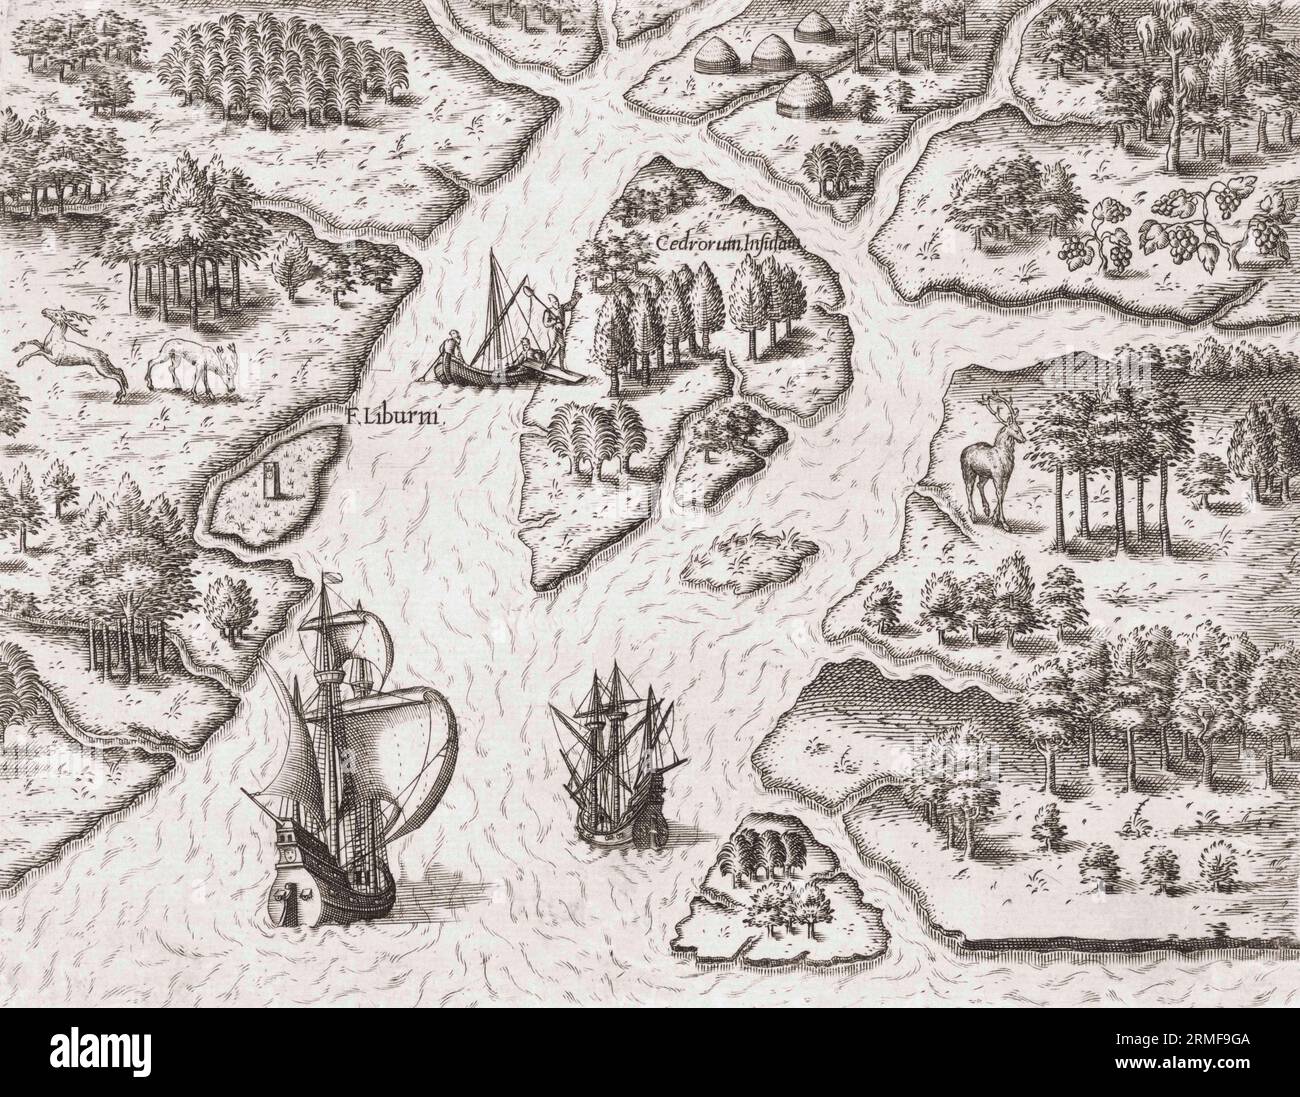 A French naval captain sets foot on an island in Florida.  After a late 16th century work by Theodor de Bry. Stock Photo